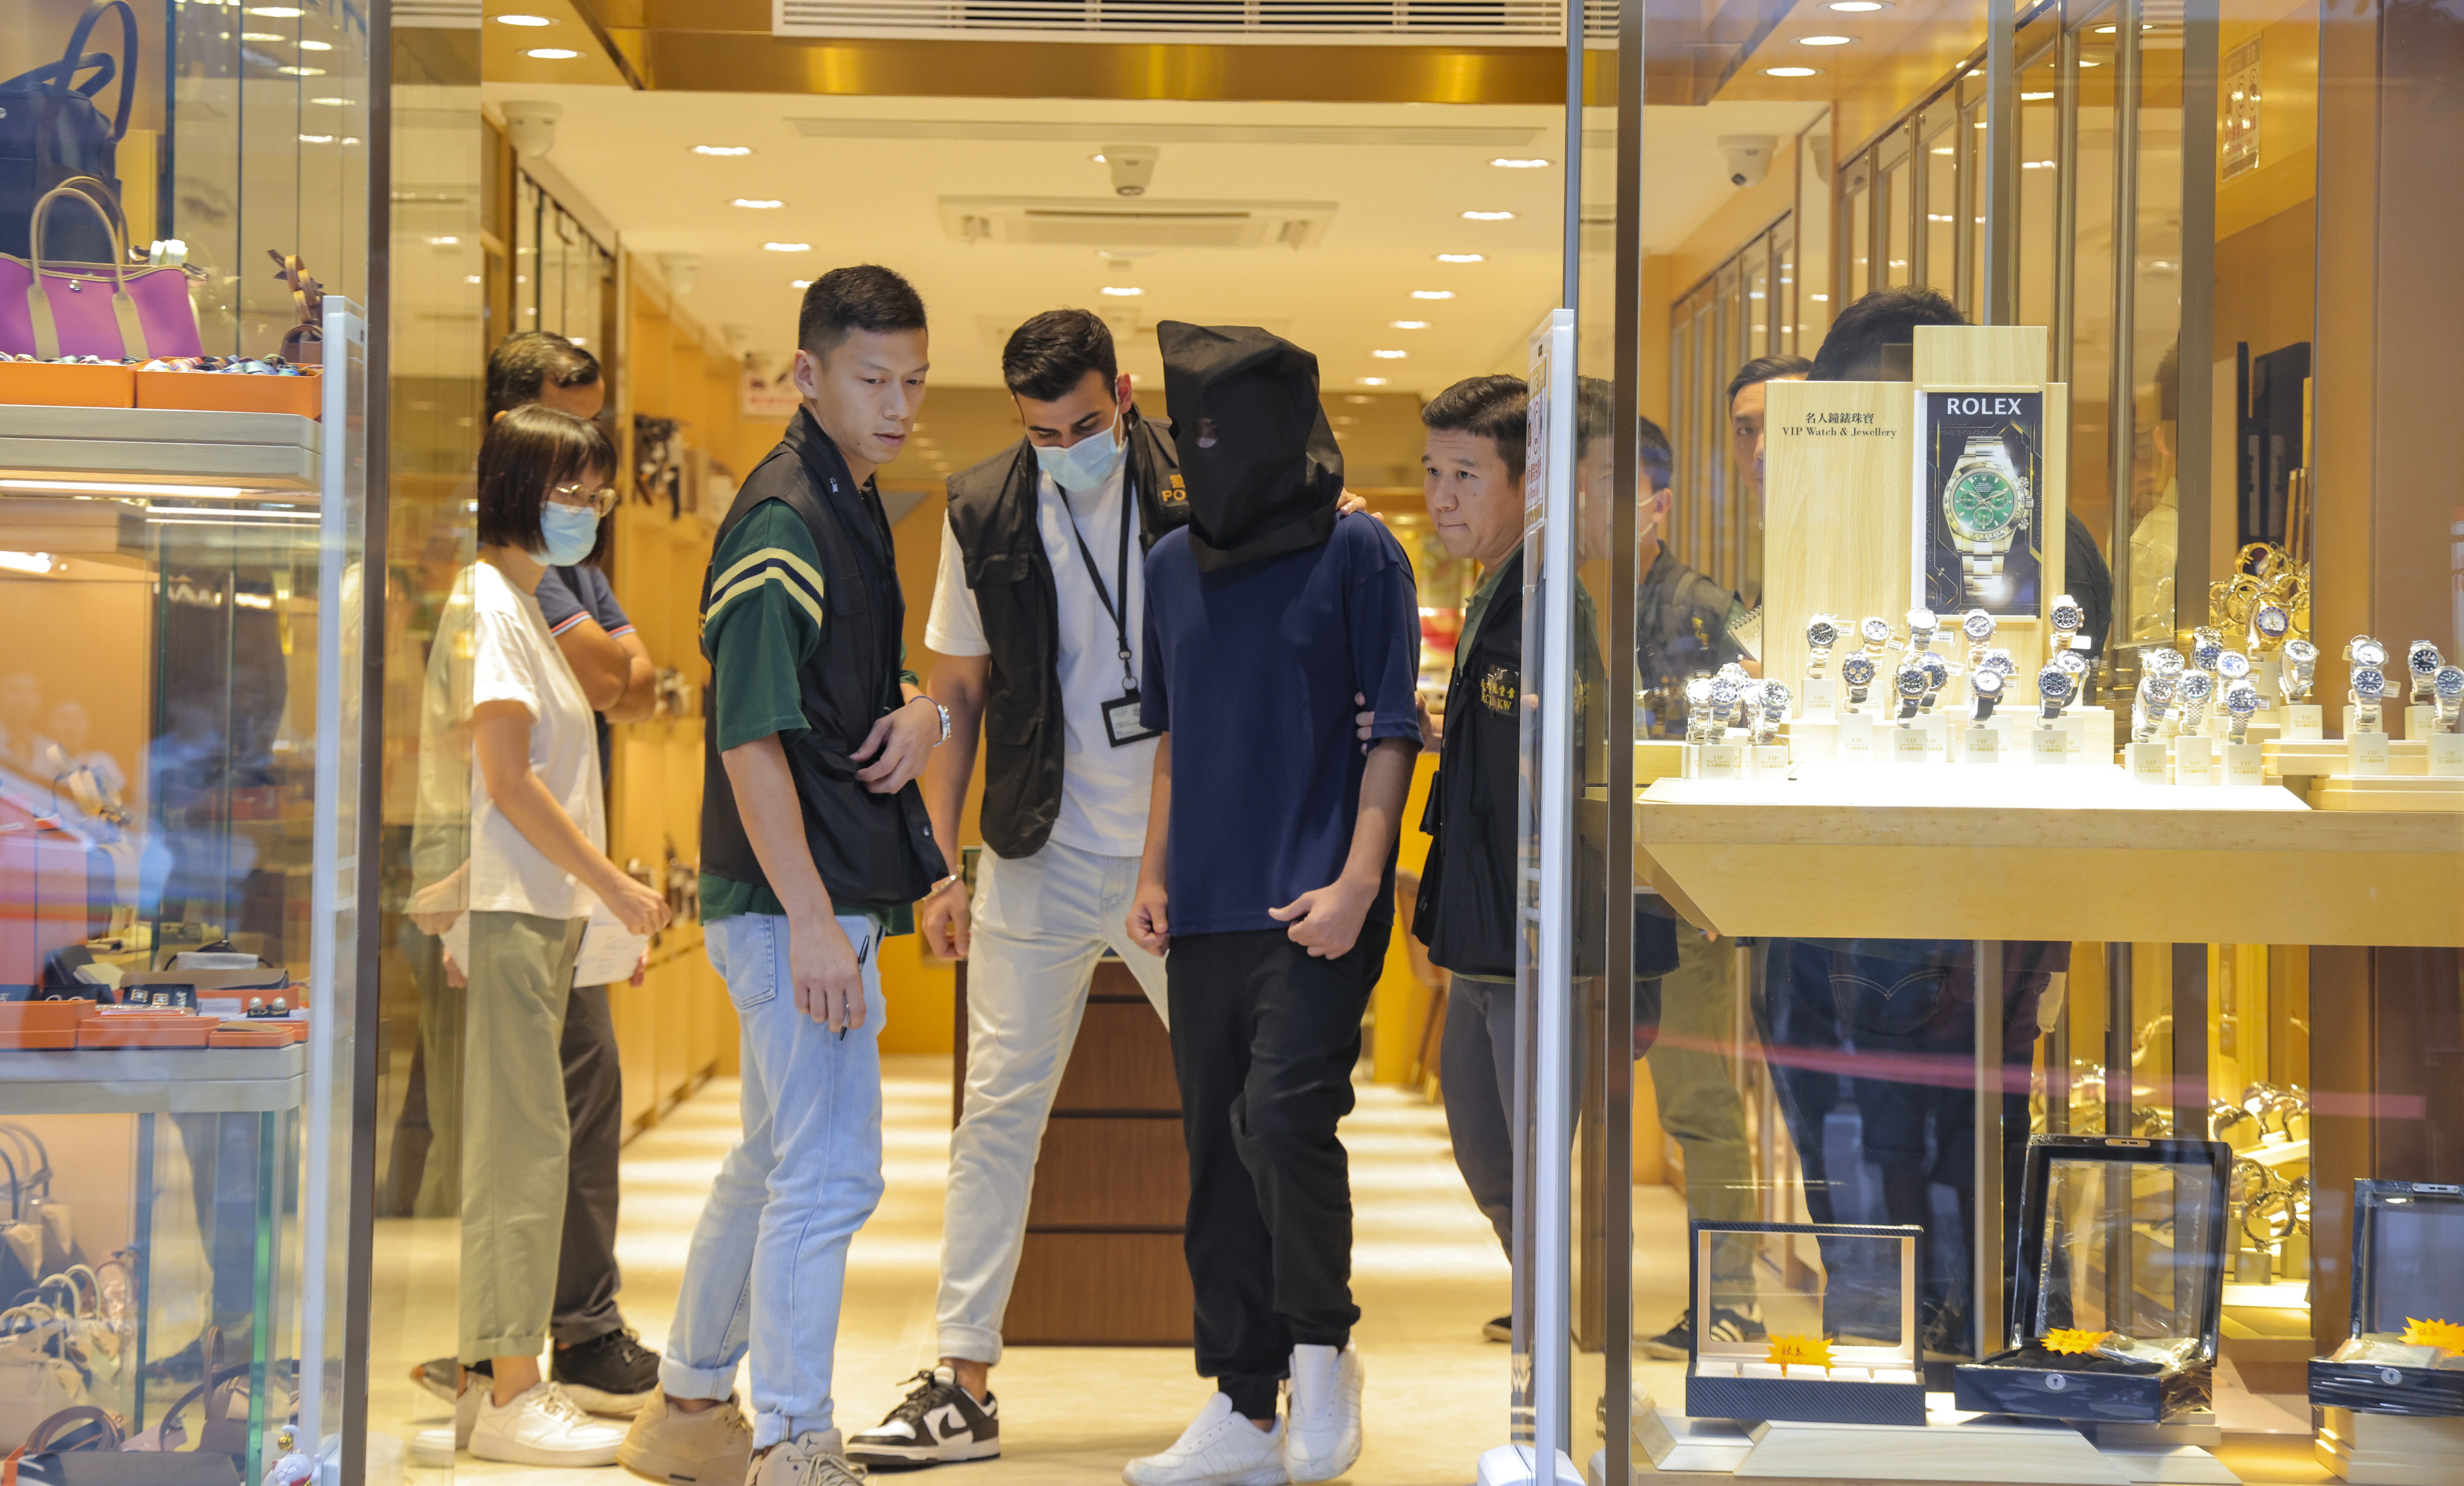 Police officers escort a suspect during a crime scene case reconstruction at a Tsim Sha Tsui watch store in September last year. Photo: Jelly Tse